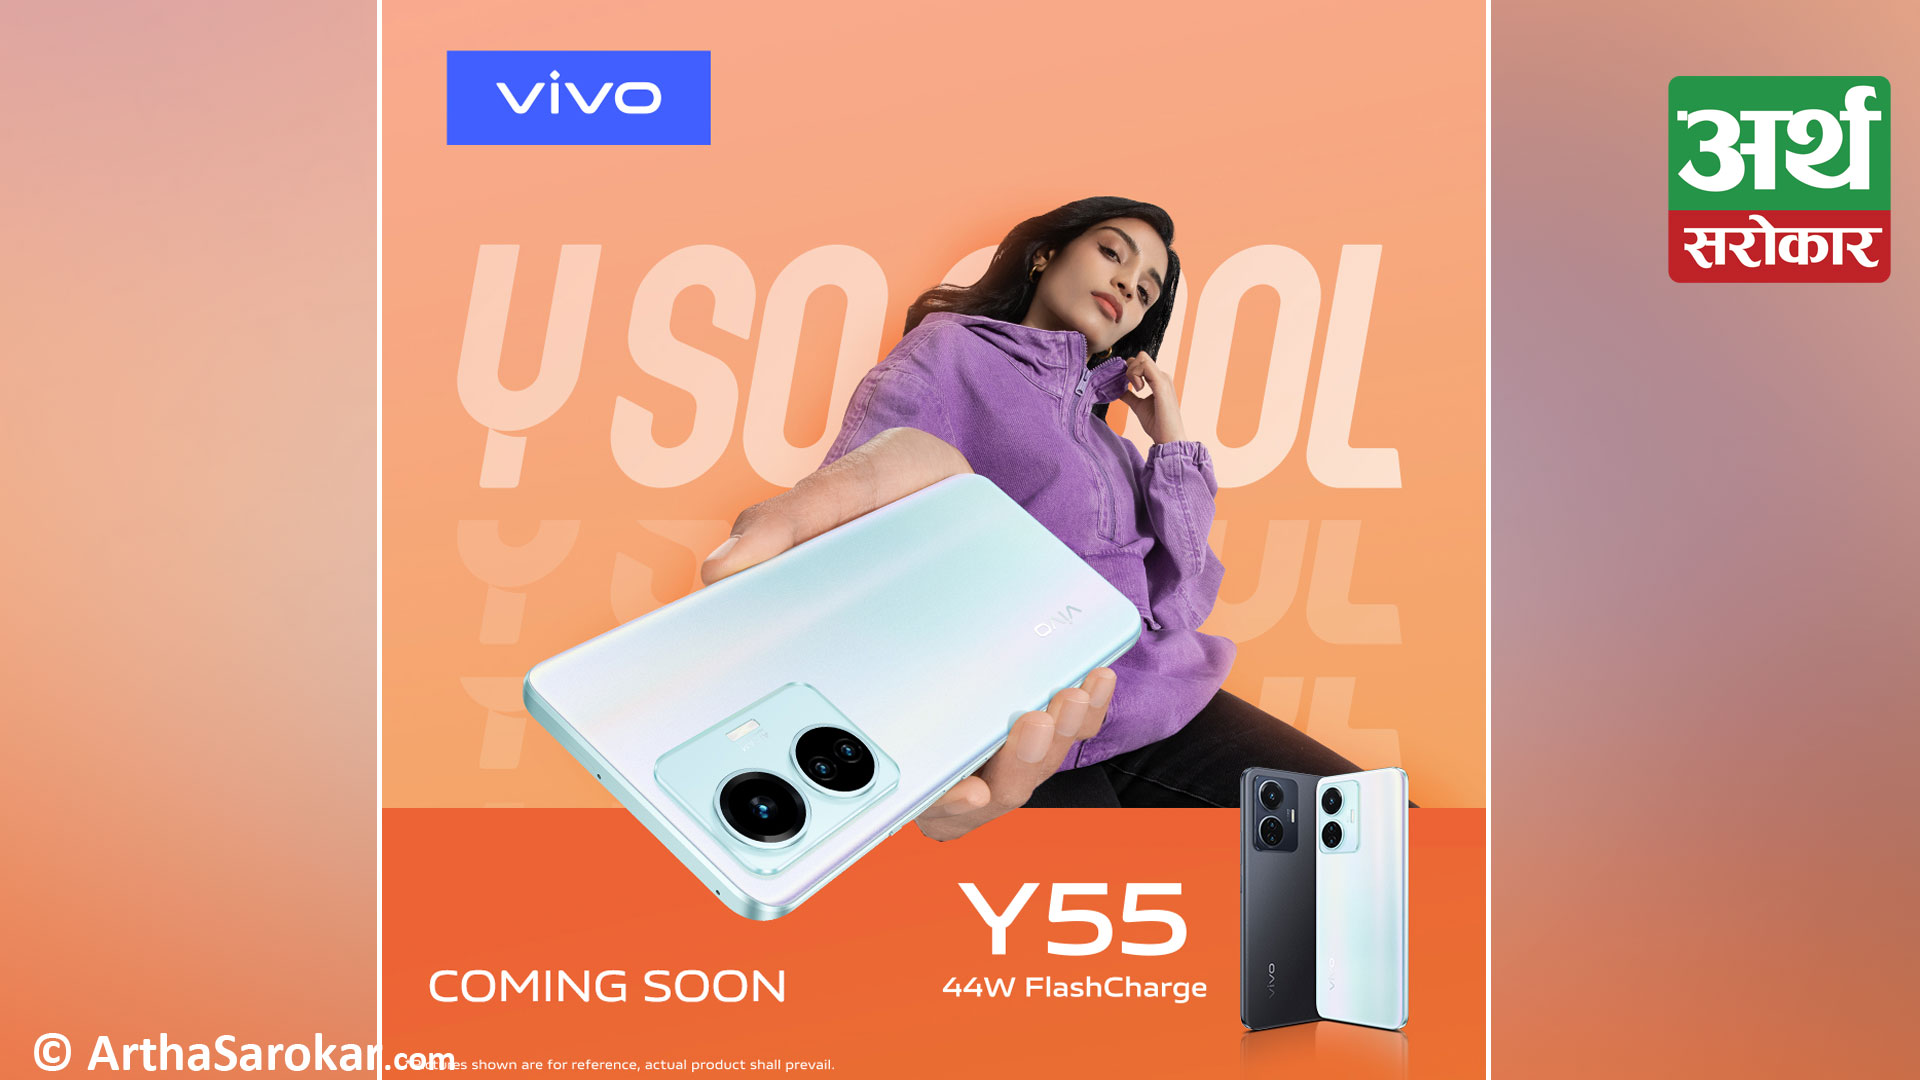 vivo Announces the Upcoming Launch of Y55; Gives A Sneak Peek To Its Features And Specs